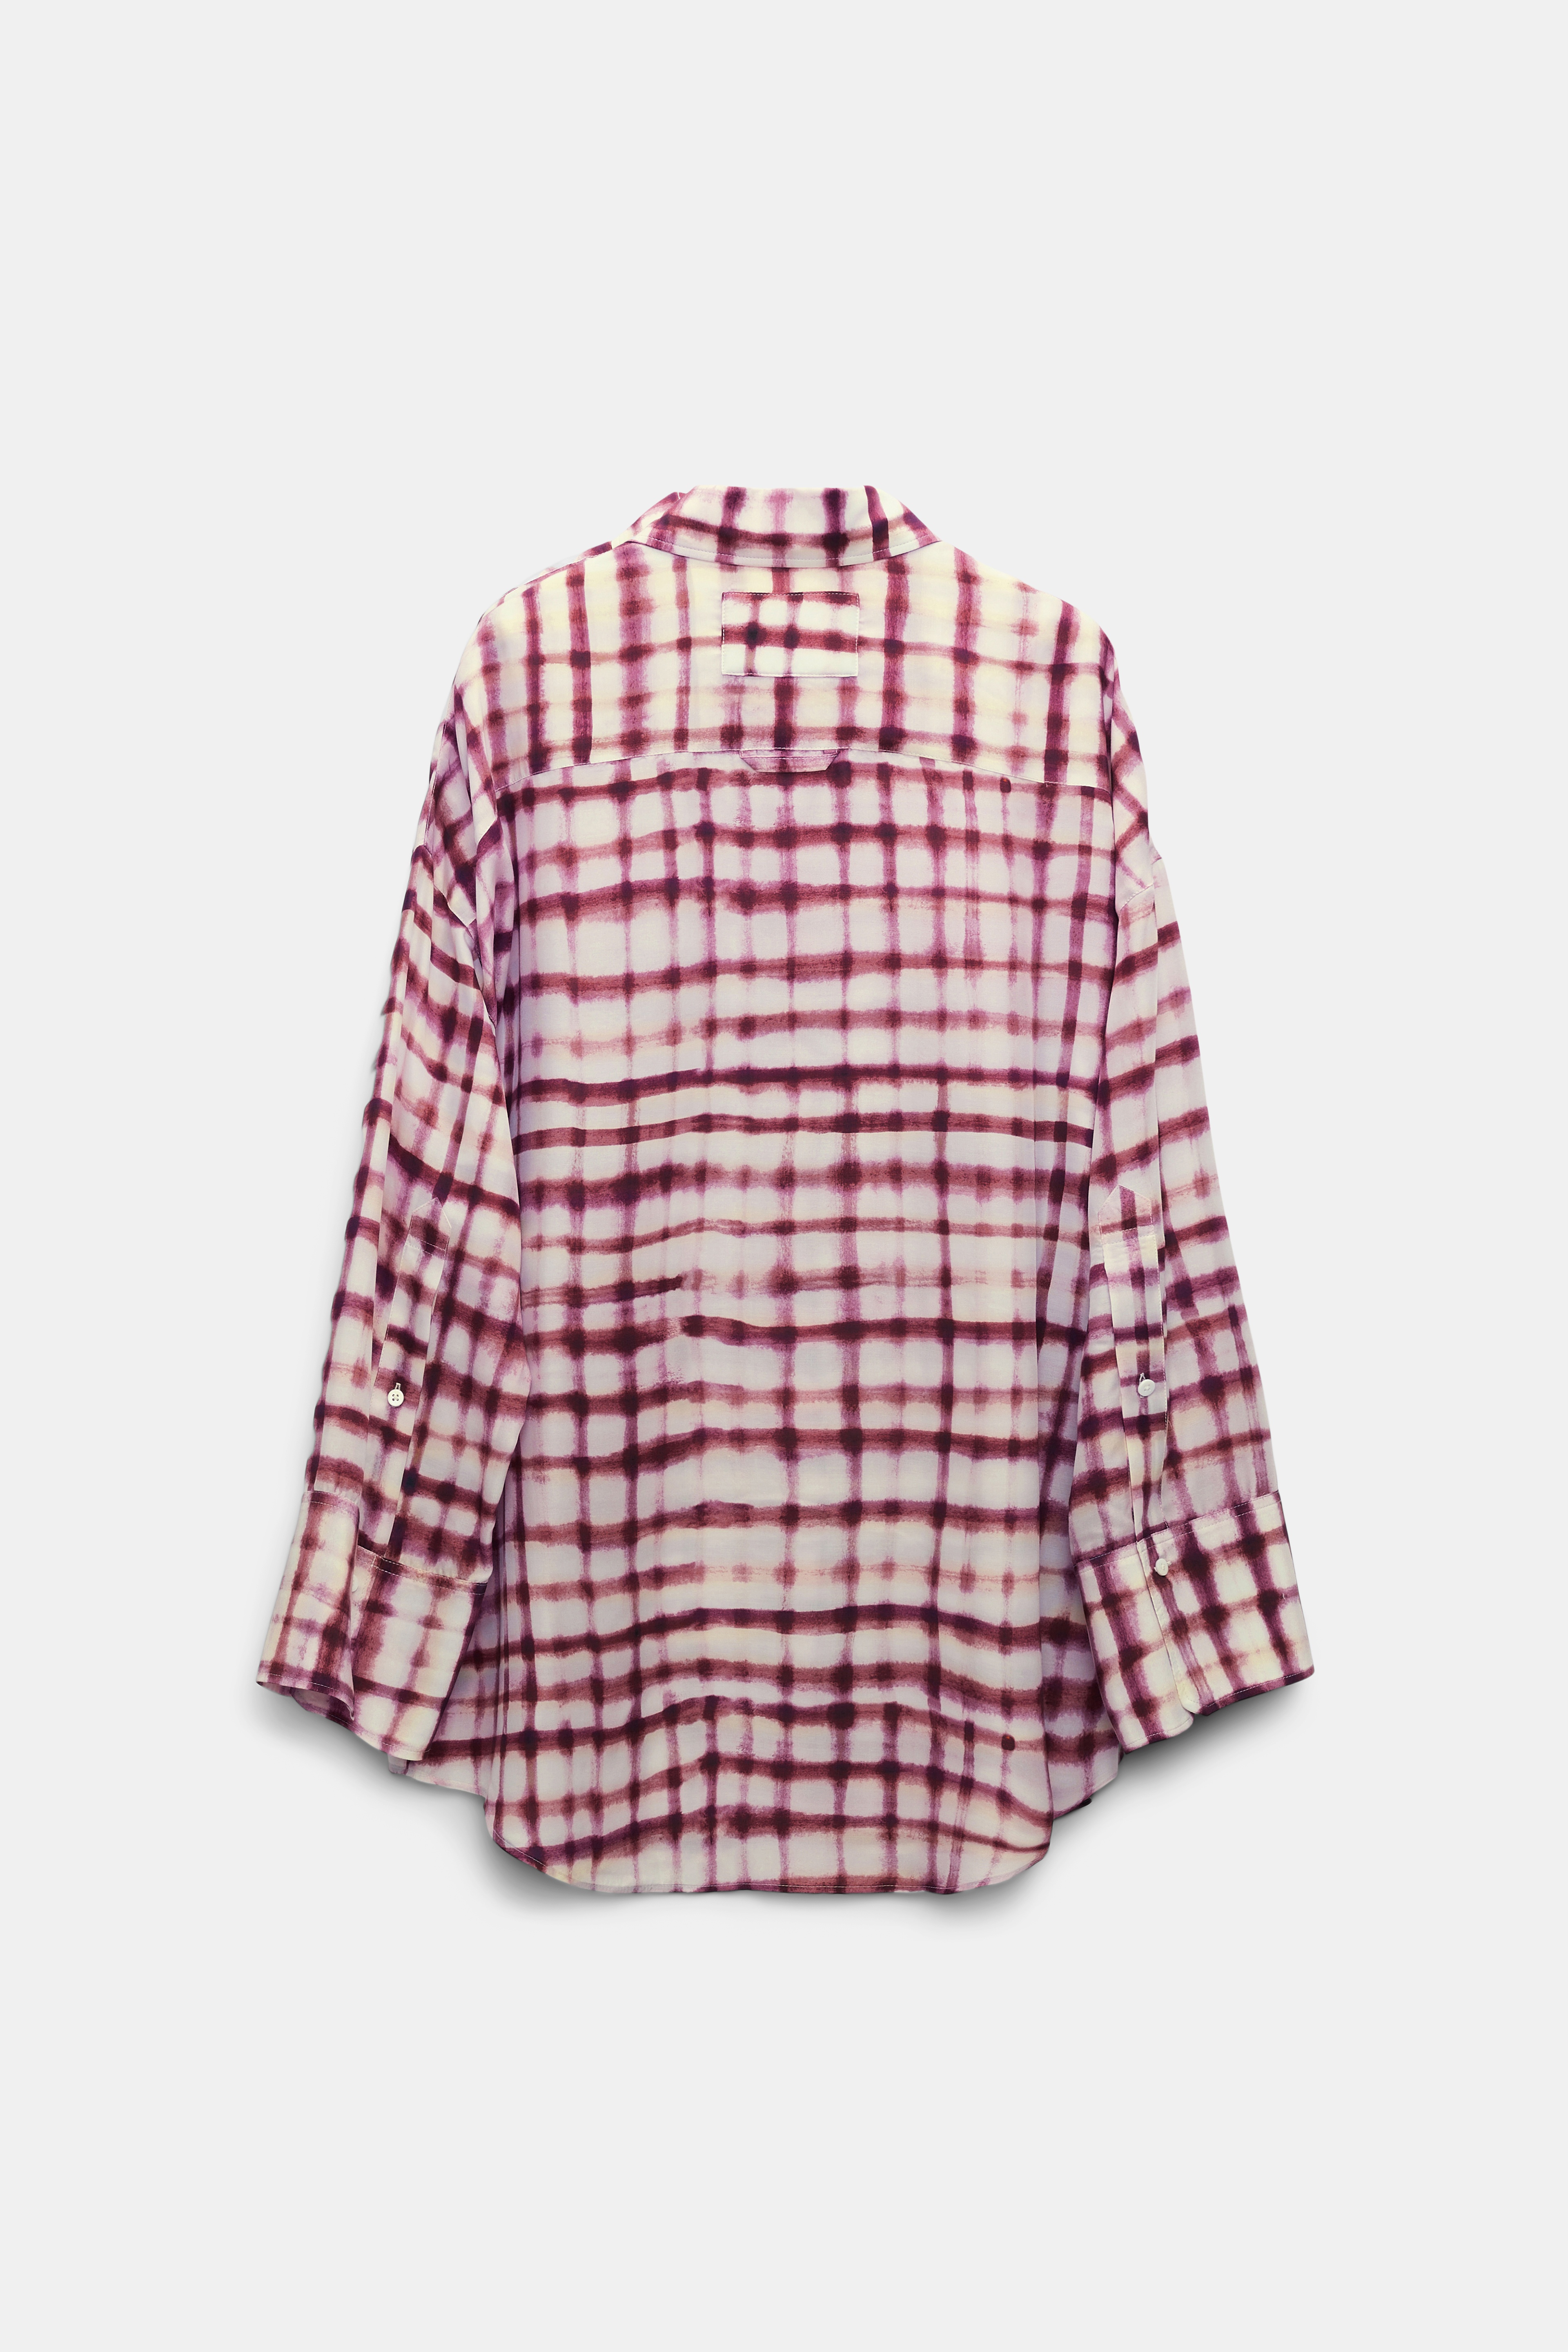 CHECKED STATEMENT blouse - 6